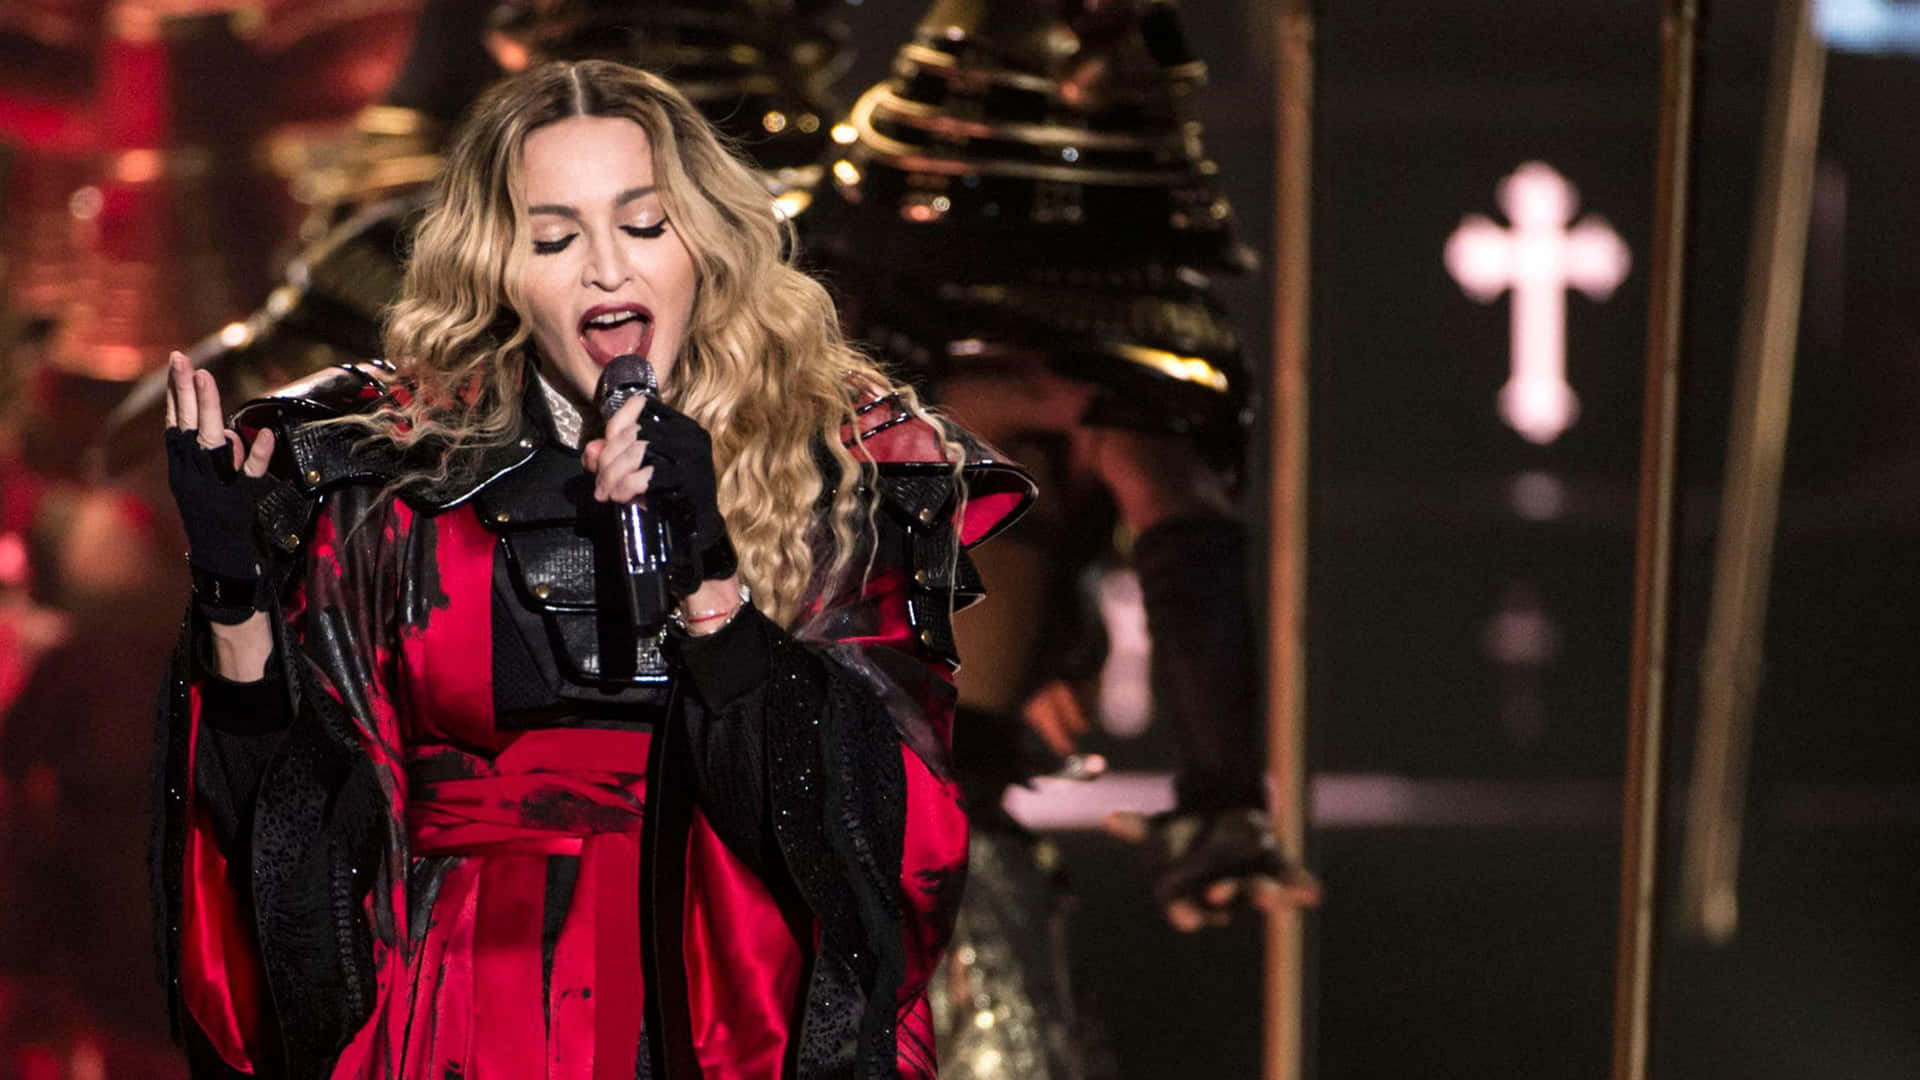 Madonna has been dominating the music scene for over 40 years.